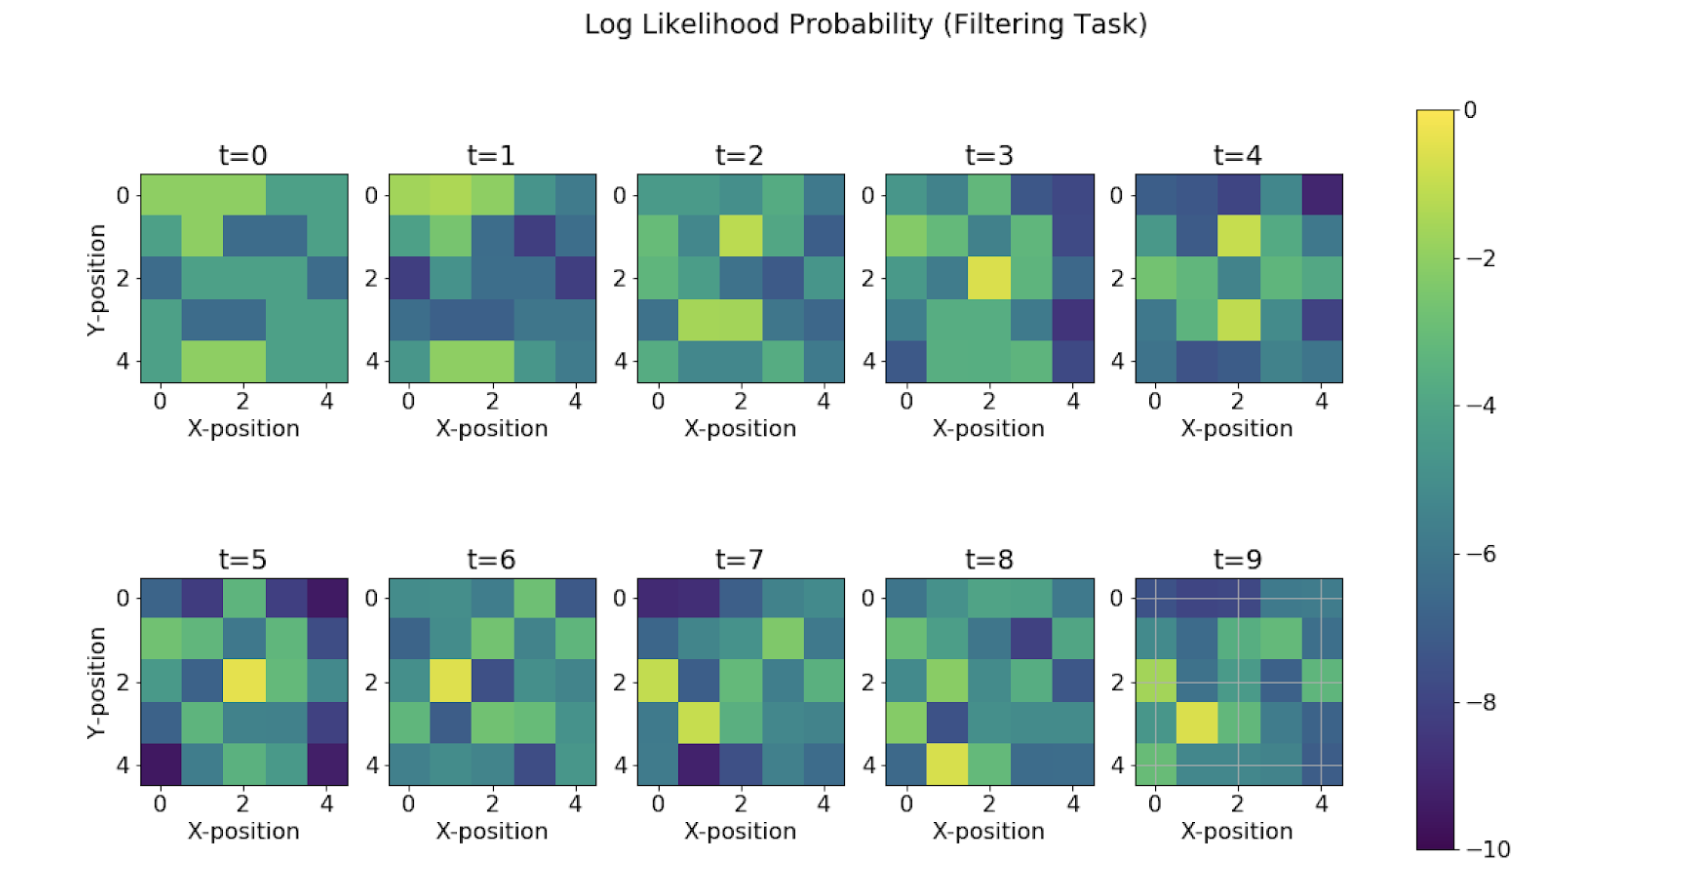 Log-Likelihood of the normalized probabilities estimated for each state by filtering task